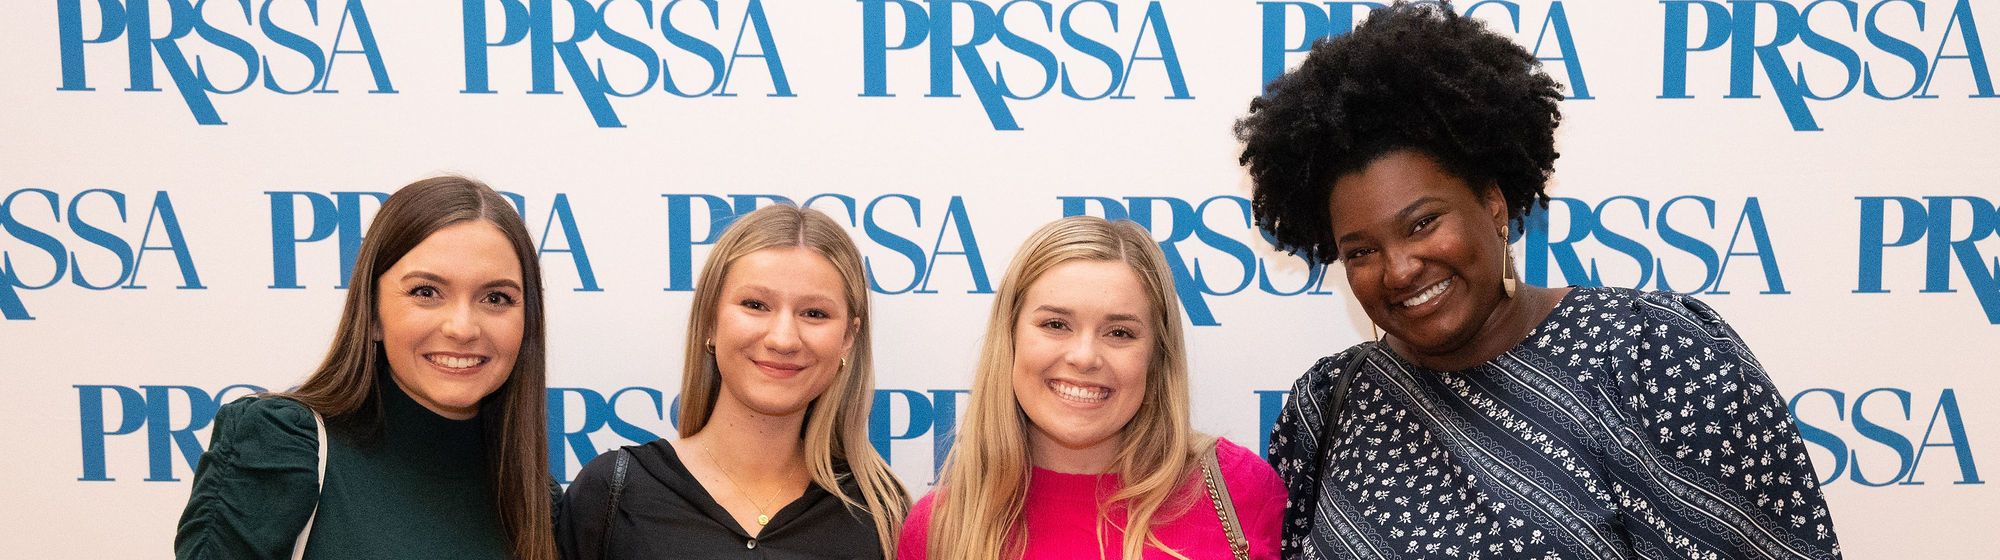 Seven PRSSA students in front of logo backdrop